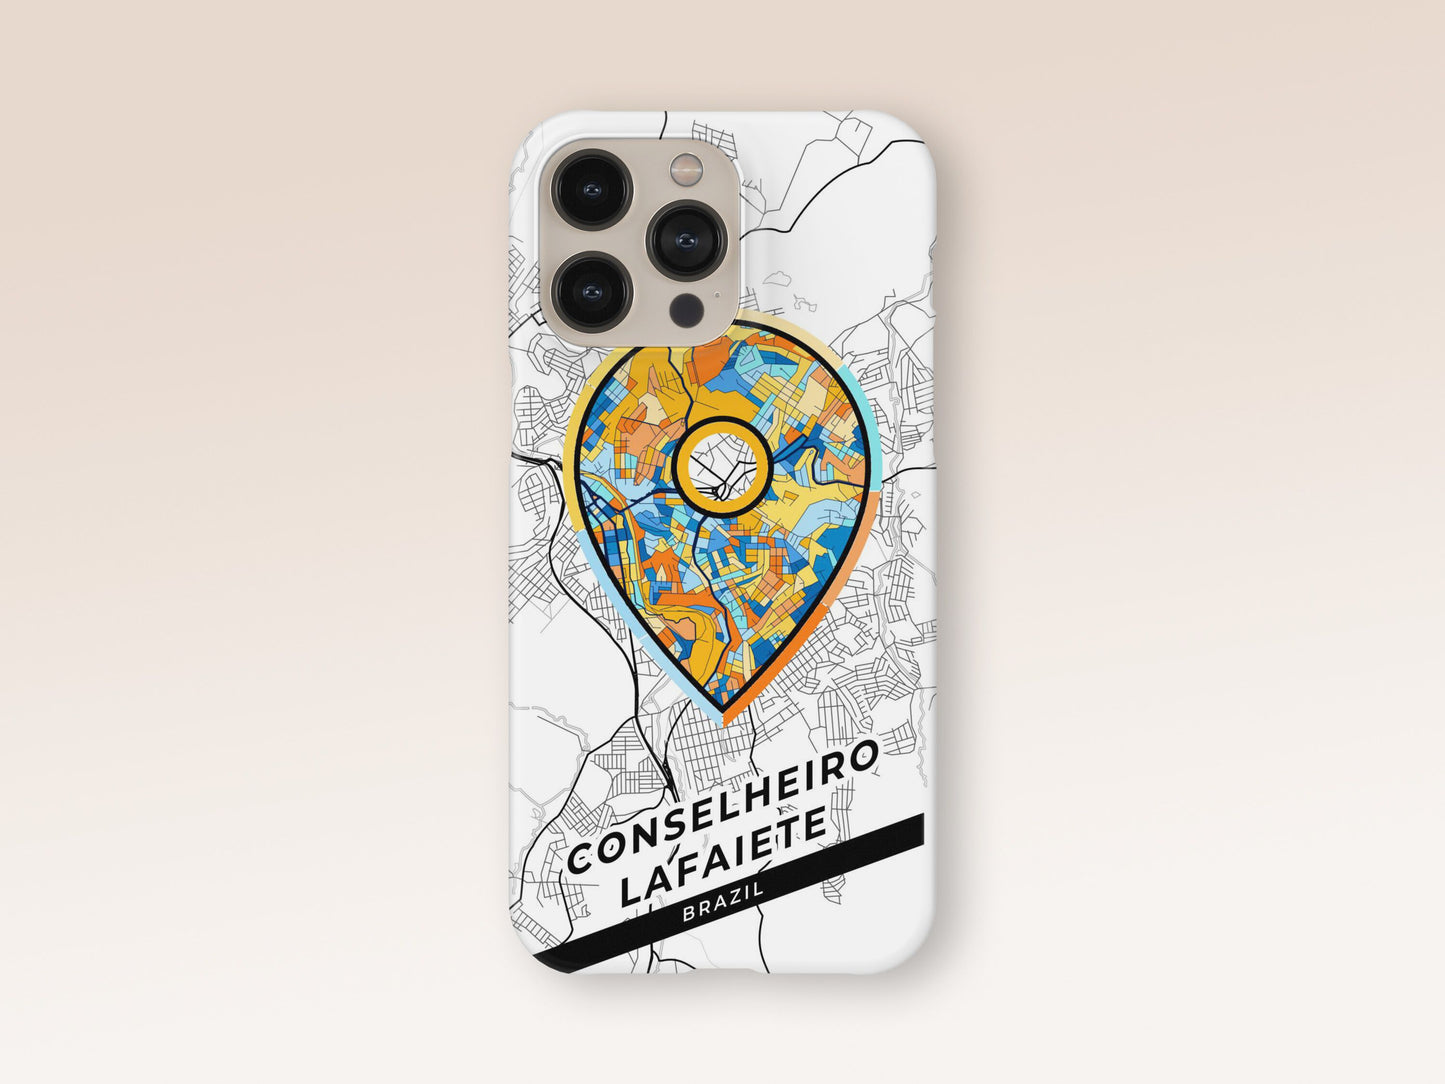 Conselheiro Lafaiete Brazil slim phone case with colorful icon. Birthday, wedding or housewarming gift. Couple match cases. 1